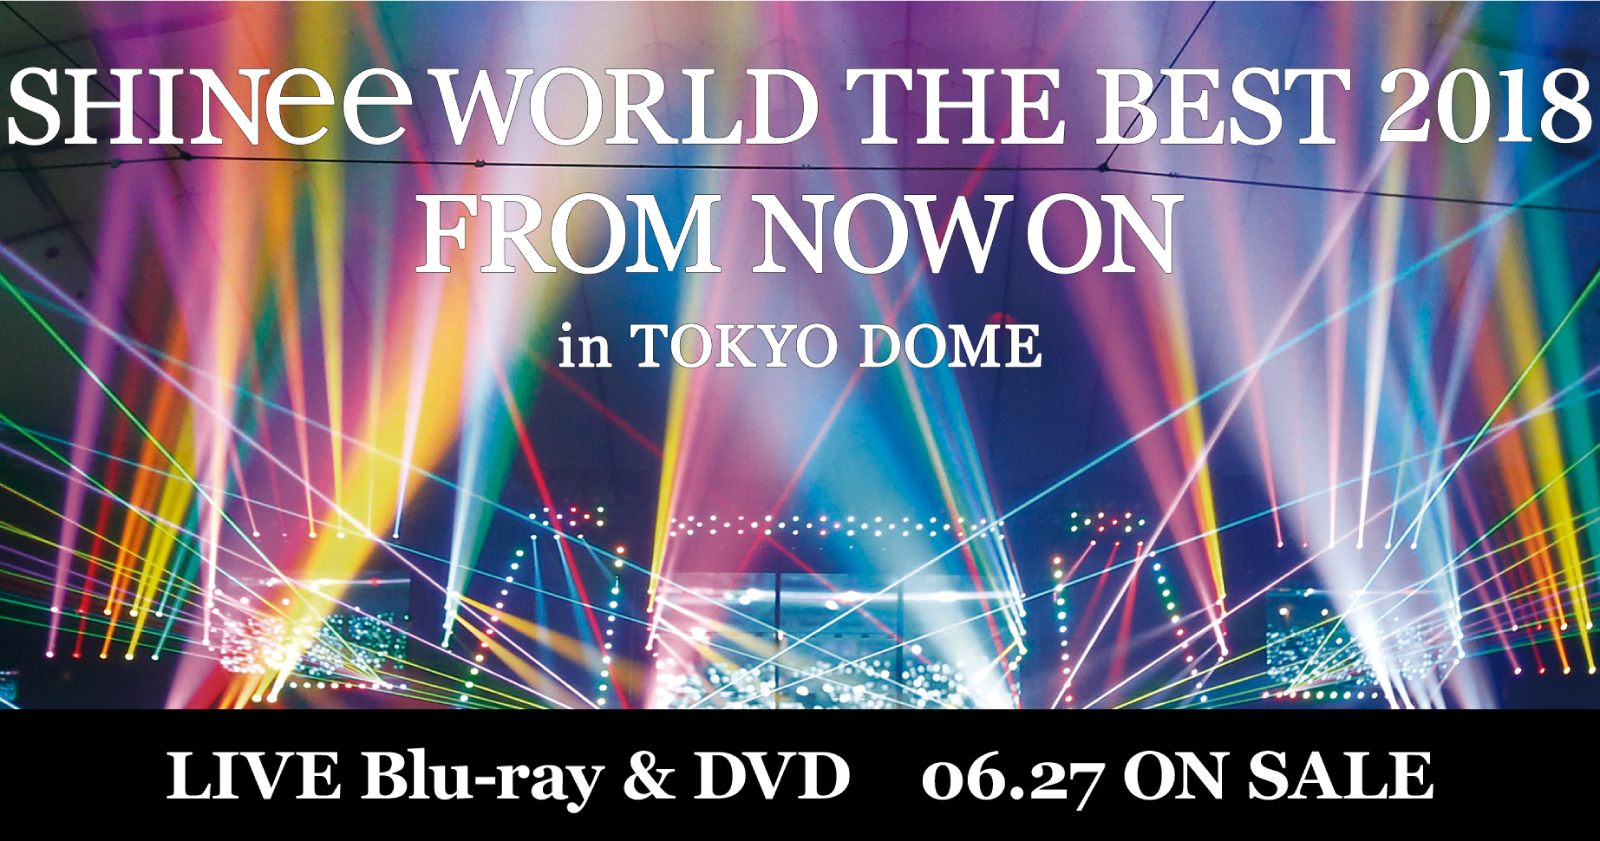 SHINee WORLD THE BEST 2018～FROM NOW ON～ in TOKYO DOME」スペシャルサイト